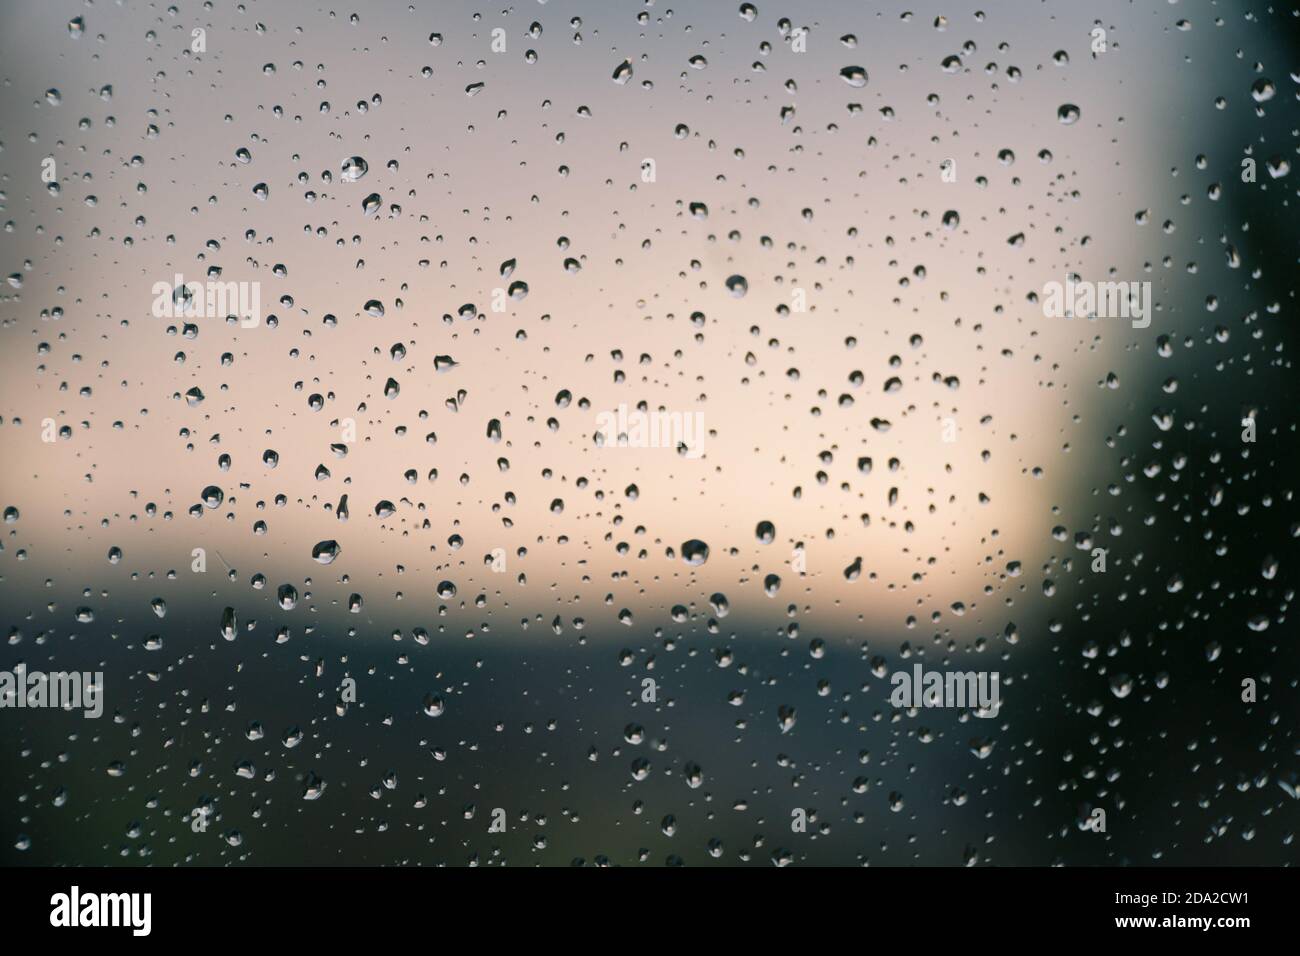 Water drops on window glass after rain. Macro of raindrops as abstract background with shallow depth of field. Rainy weather, melancholic mood. Stock Photo